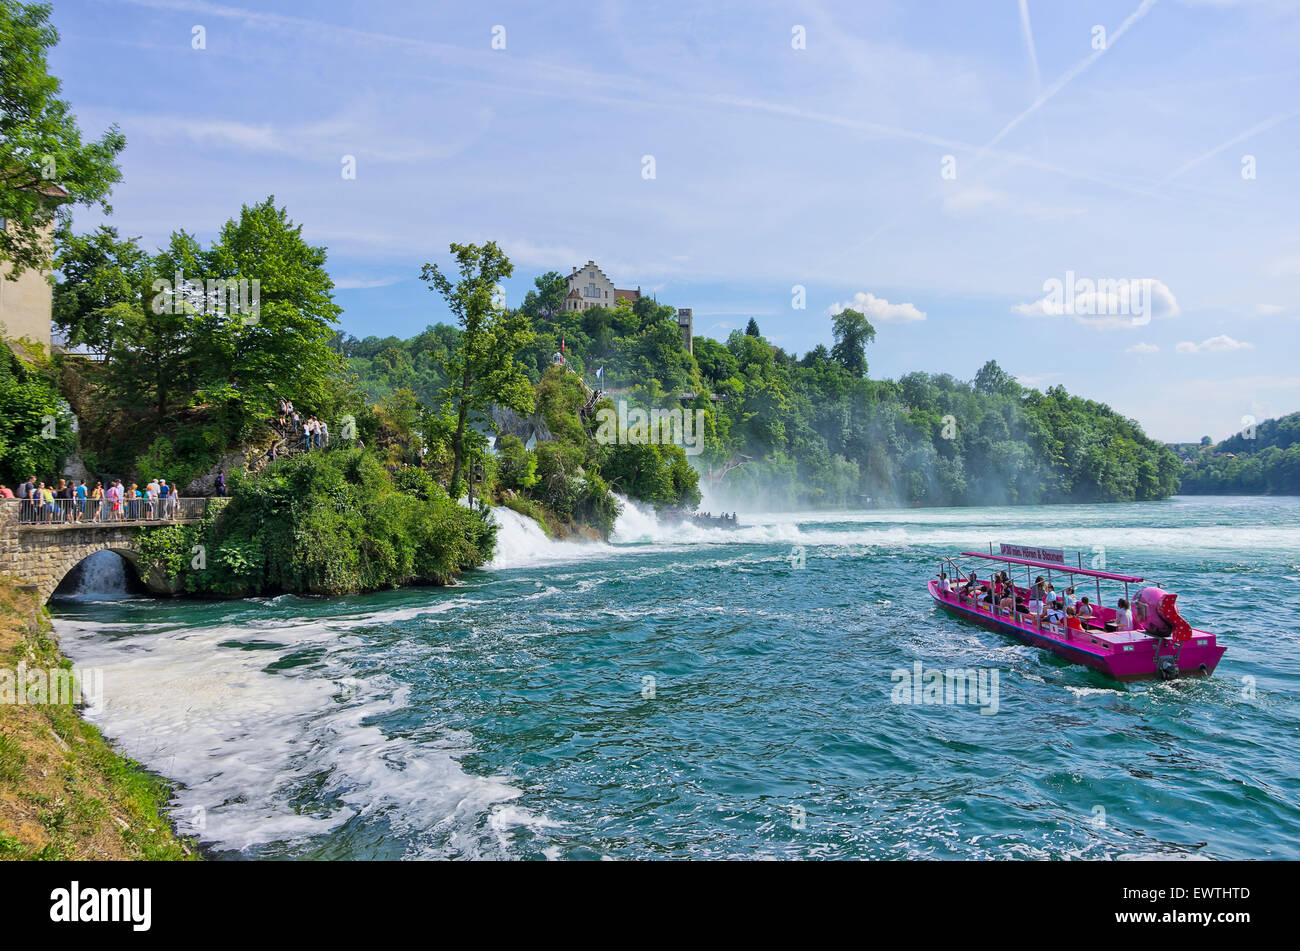 Tourists by land and by water gaze at the Rhine Falls in Schaffhausen, Switzerland. Stock Photo